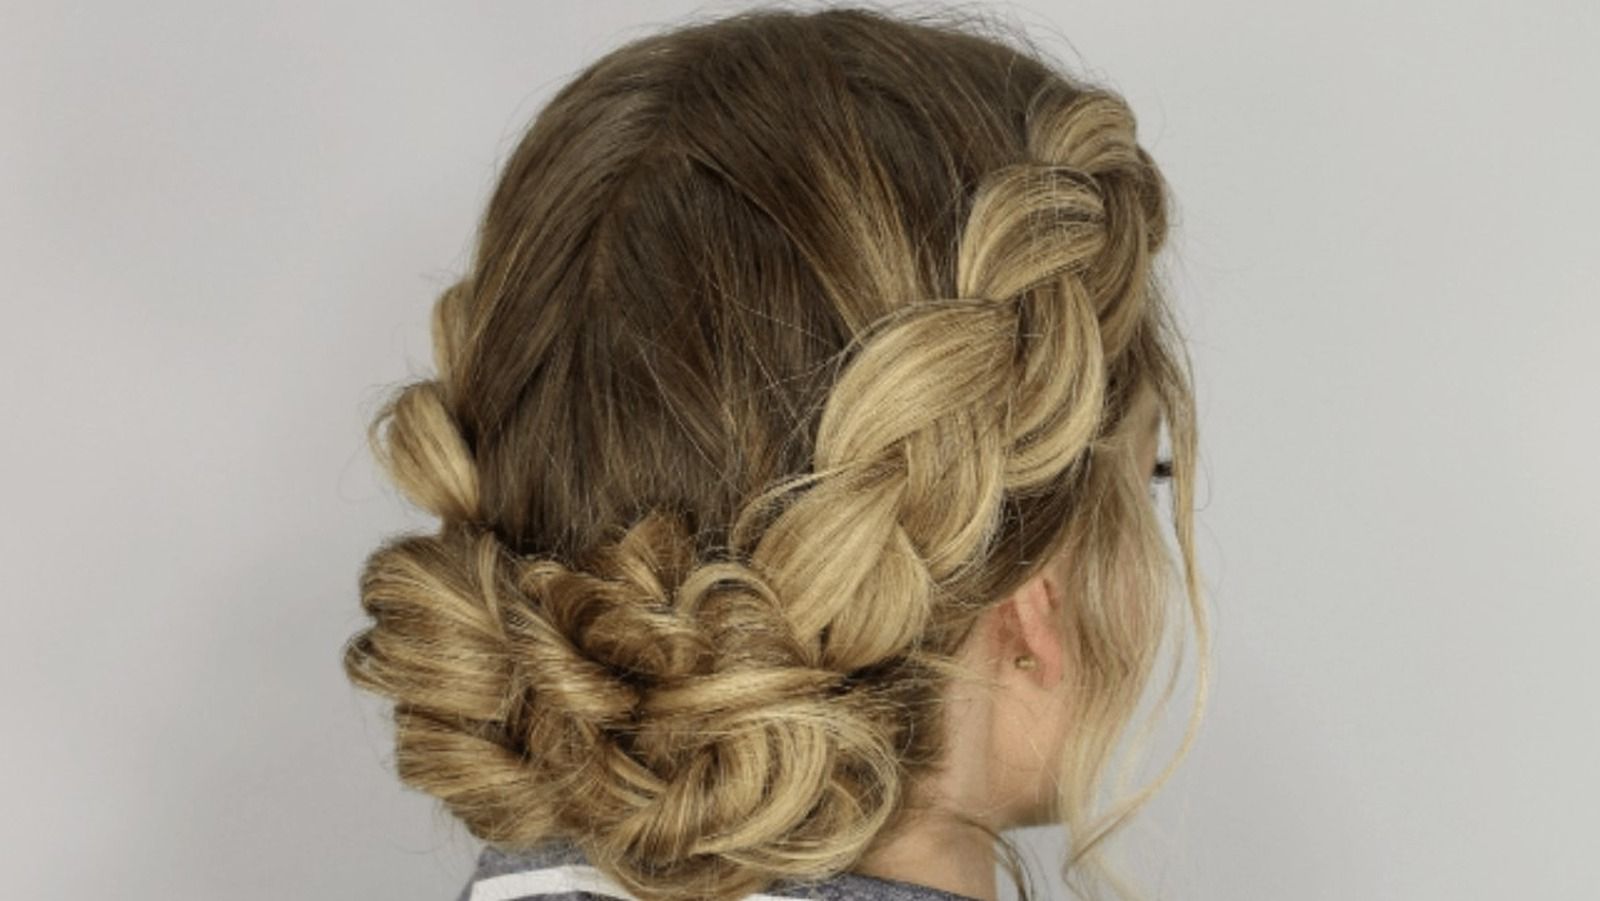 15 Braided Styles To Elevate Your Basic Messy Bun In Side Fishtail Braids For A Low Twist (View 20 of 25)